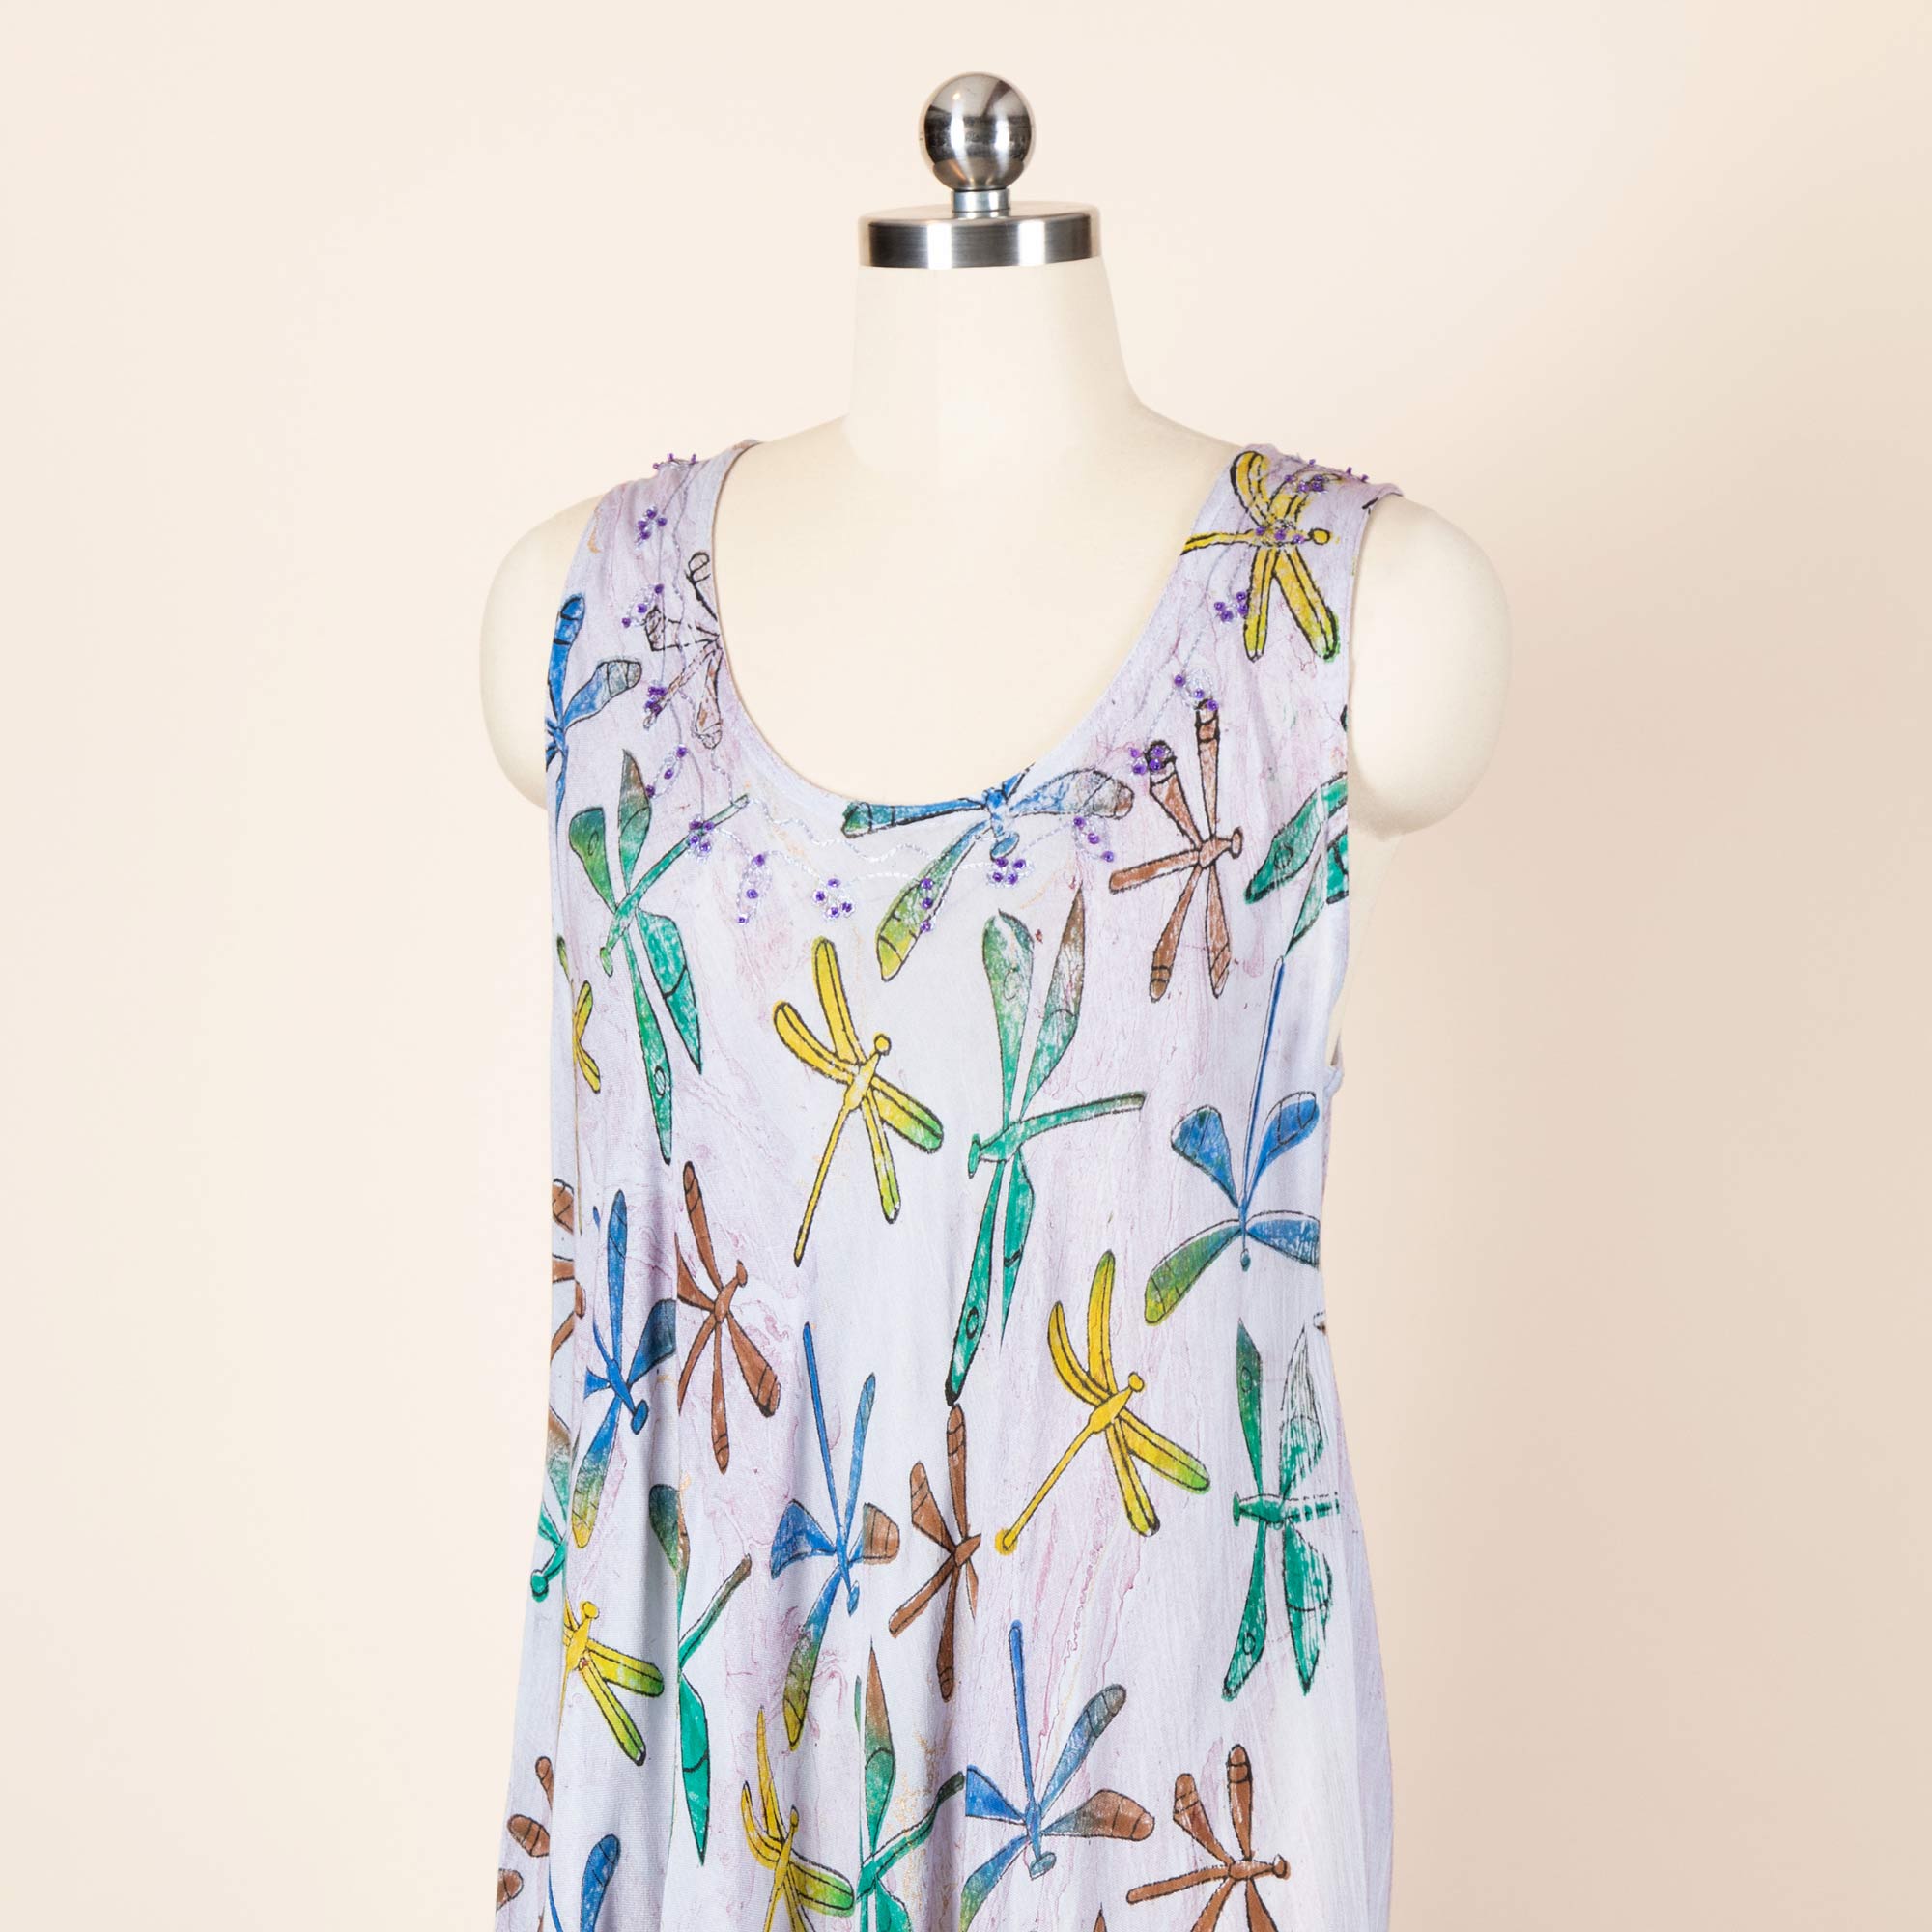 A dress adorned with a dragonfly print, created by hand using artisanal wooden stamps